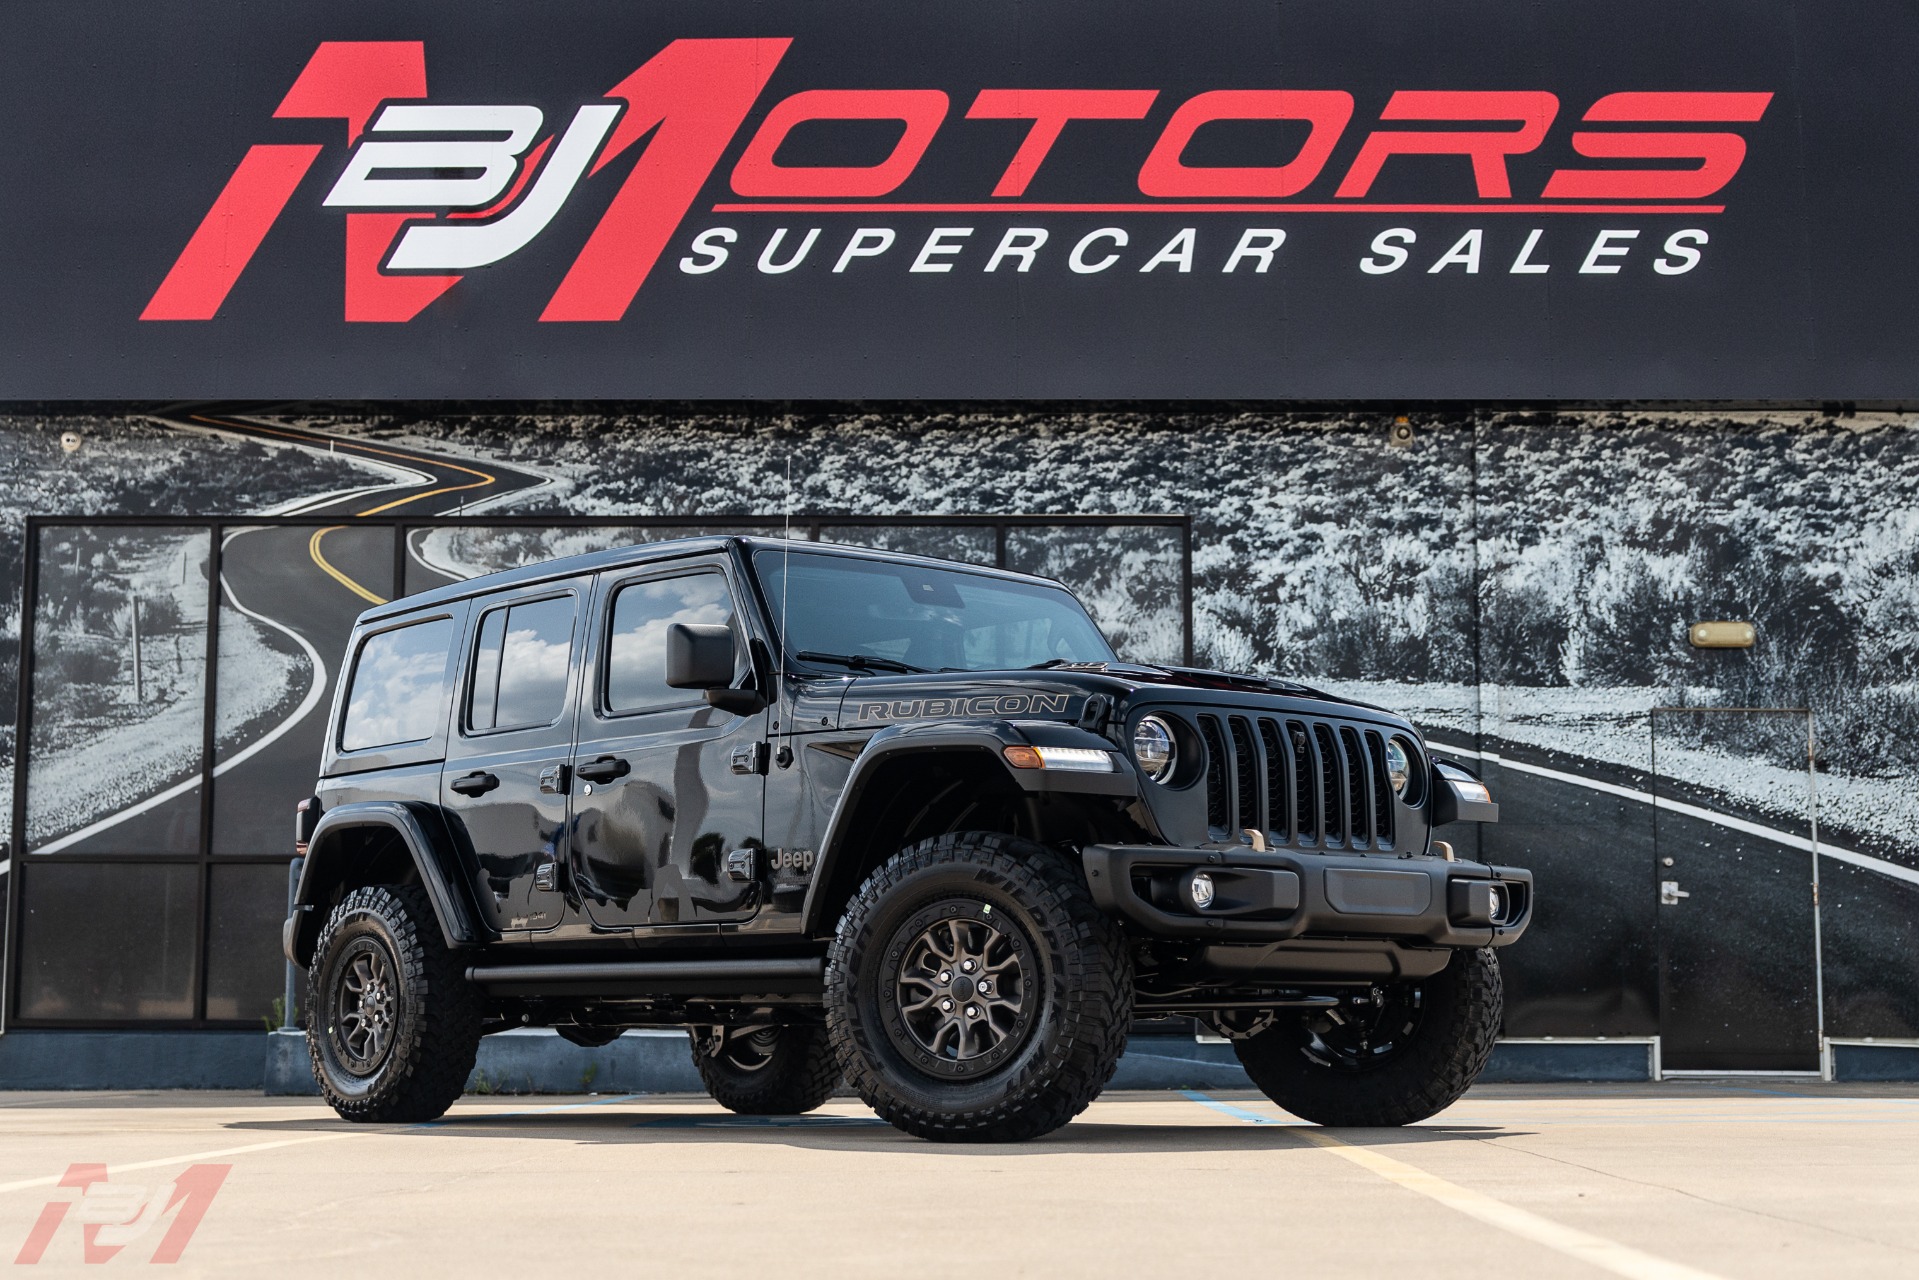 Used 2021 Jeep Wrangler Unlimited Rubicon 392 For Sale (Special Pricing) |  BJ Motors Stock #MW735470